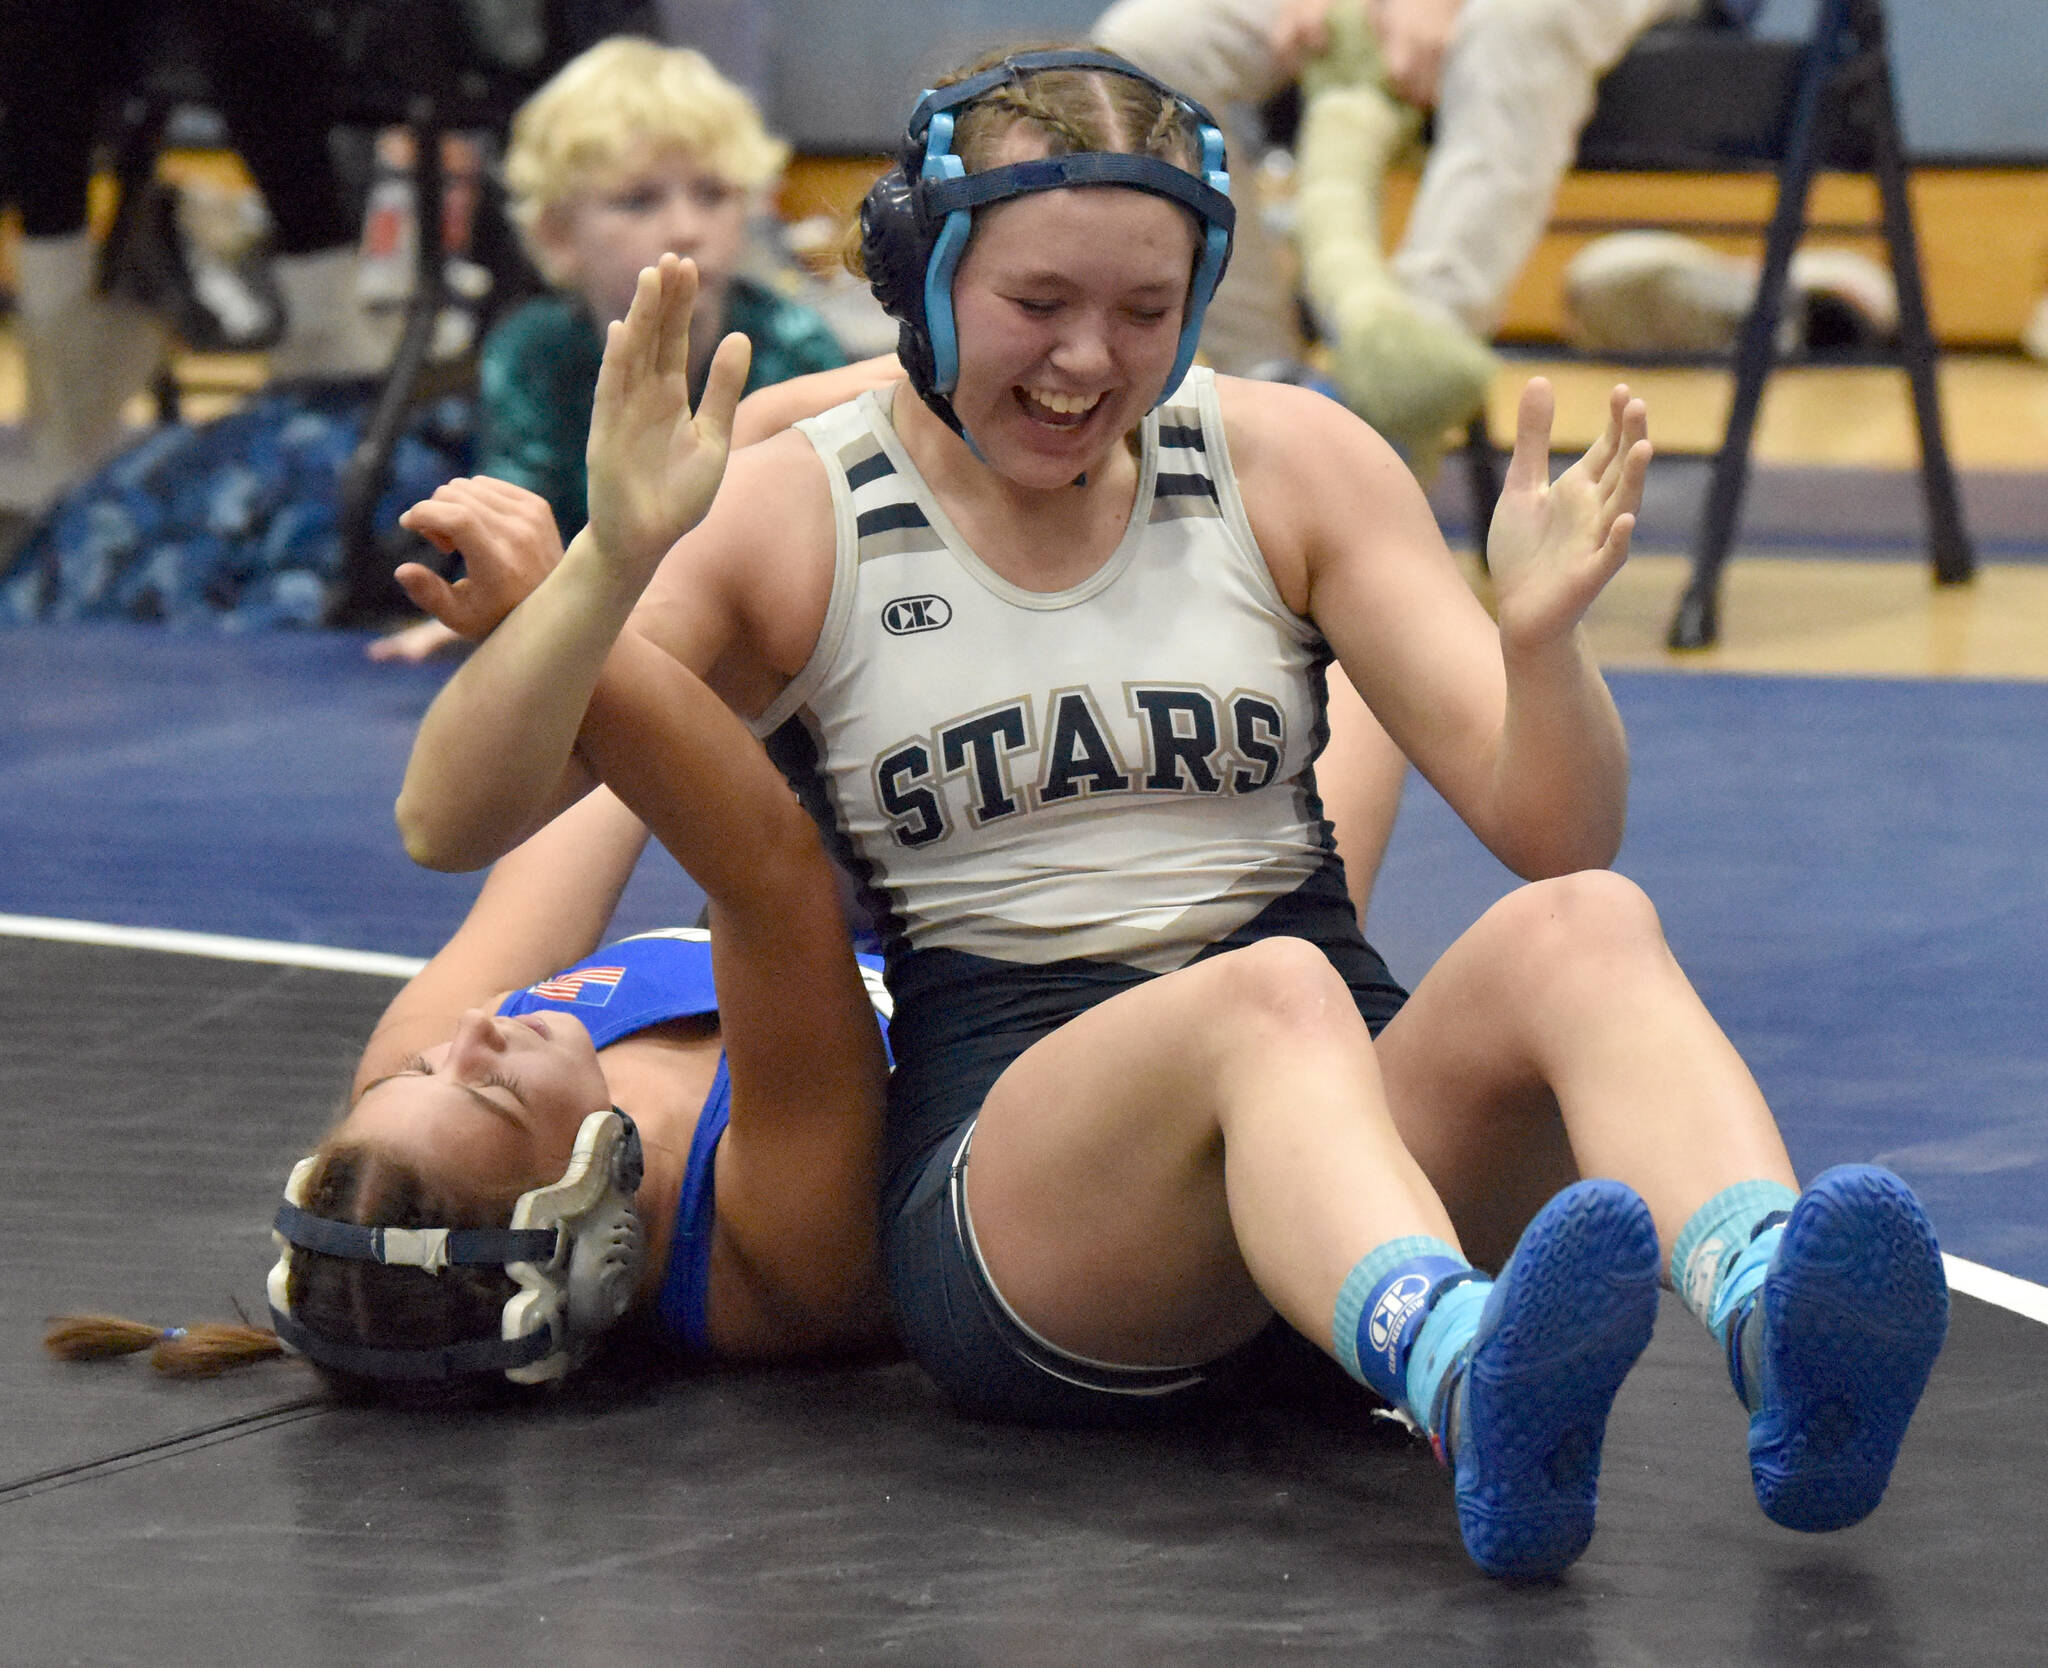 Soldotna’s Daisy Hannevold celebrates her Northern Lights Conference title at 138 pounds against Palmer’s Nena Trout on Saturday, Dec. 10, 2022, at Soldotna High School in Soldotna, Alaska. (Photo by Jeff Helminiak/Peninsula Clarion)